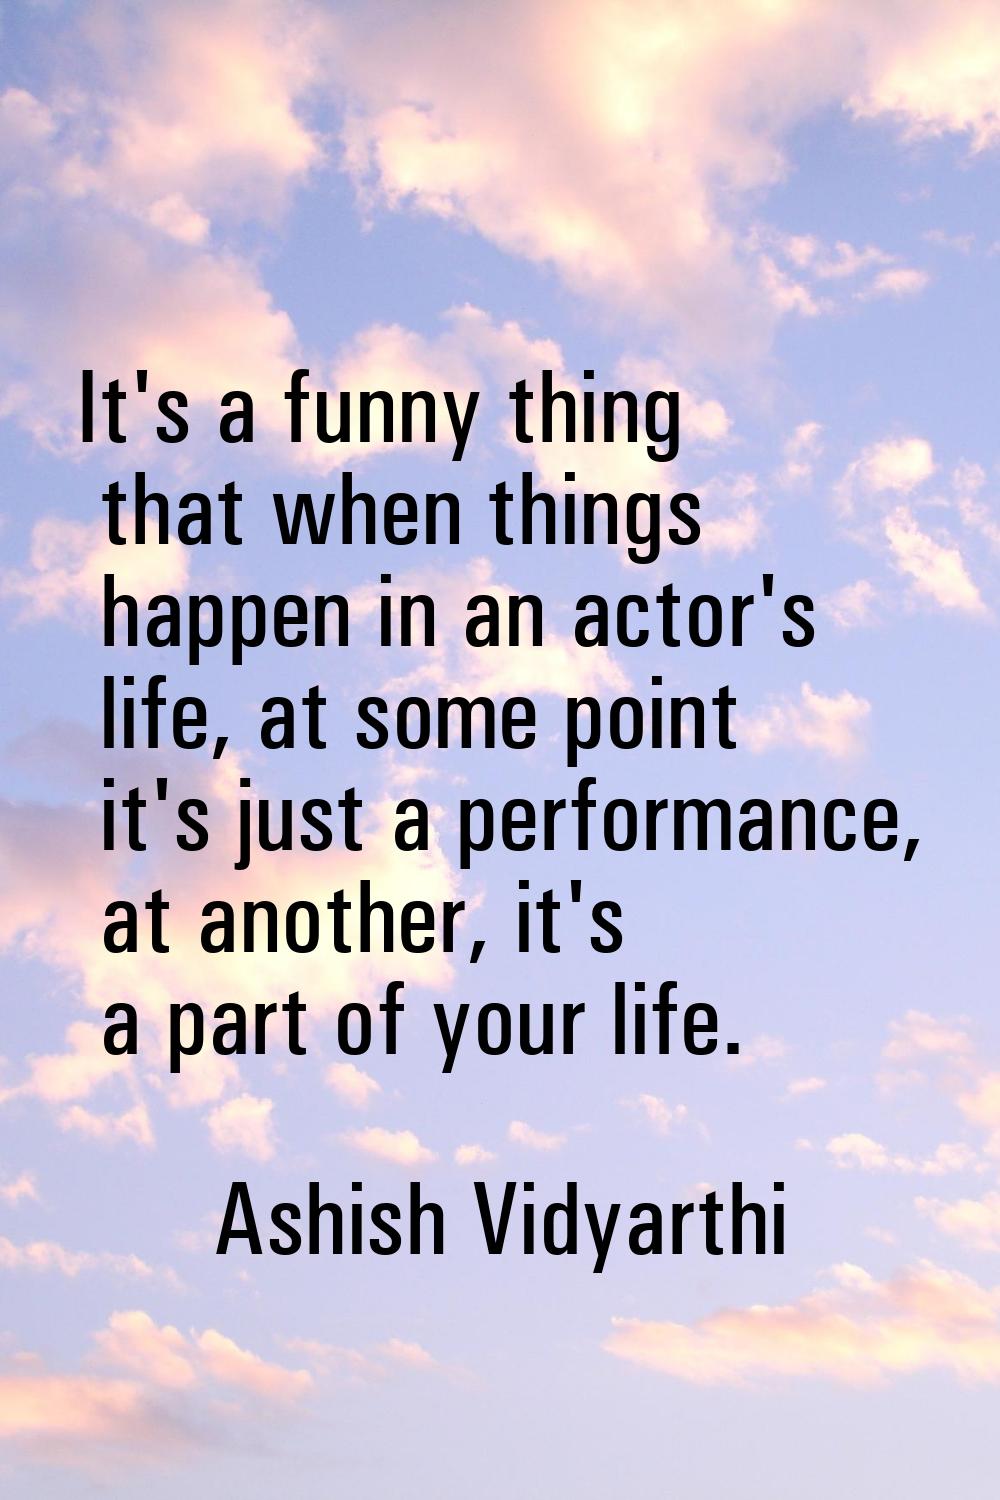 It's a funny thing that when things happen in an actor's life, at some point it's just a performanc